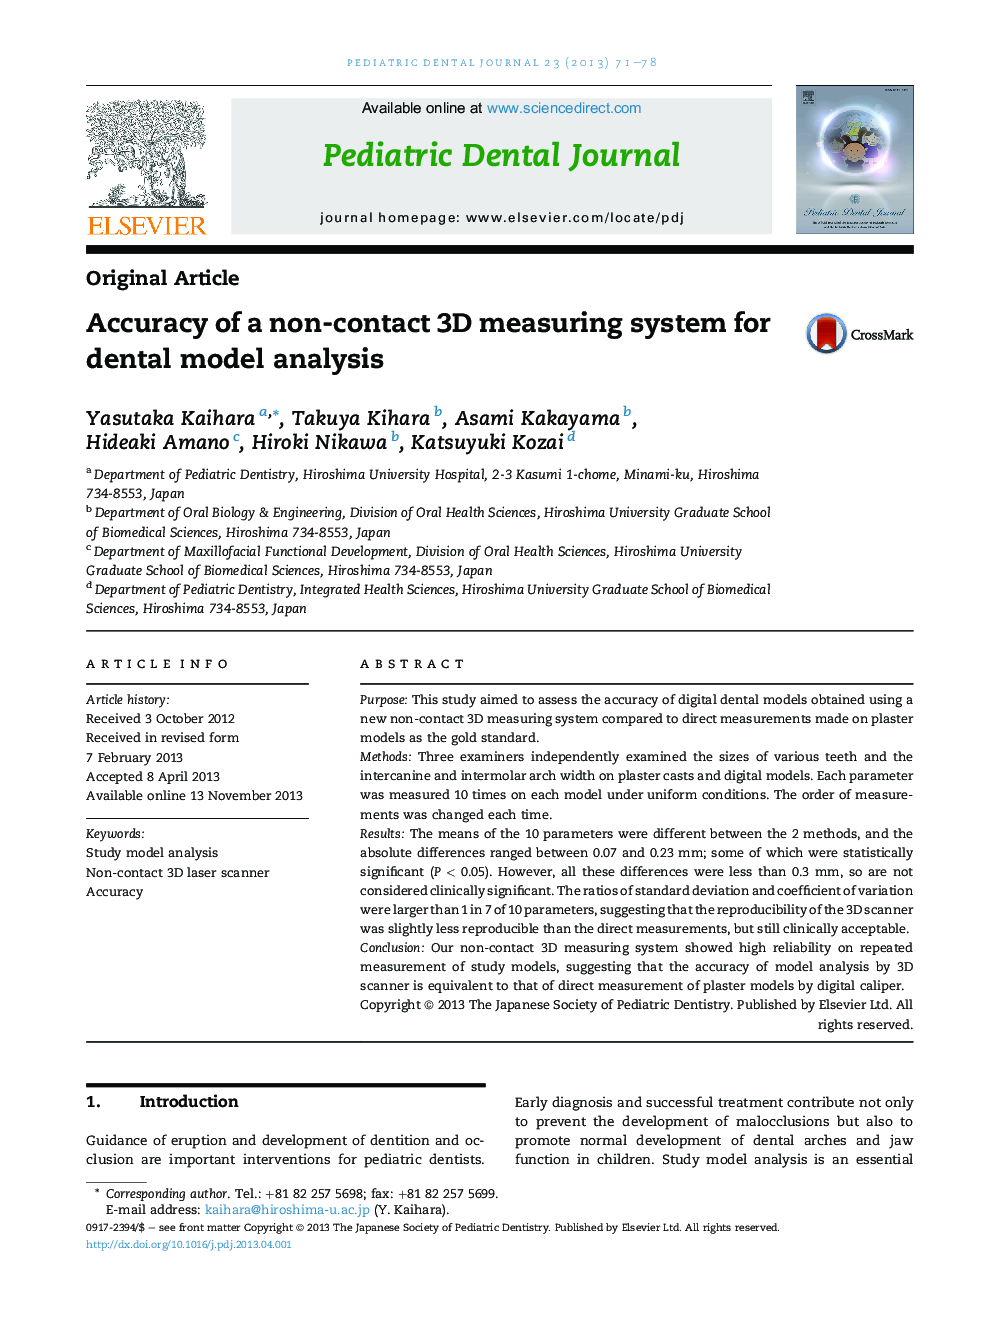 Accuracy of a non-contact 3D measuring system for dental model analysis